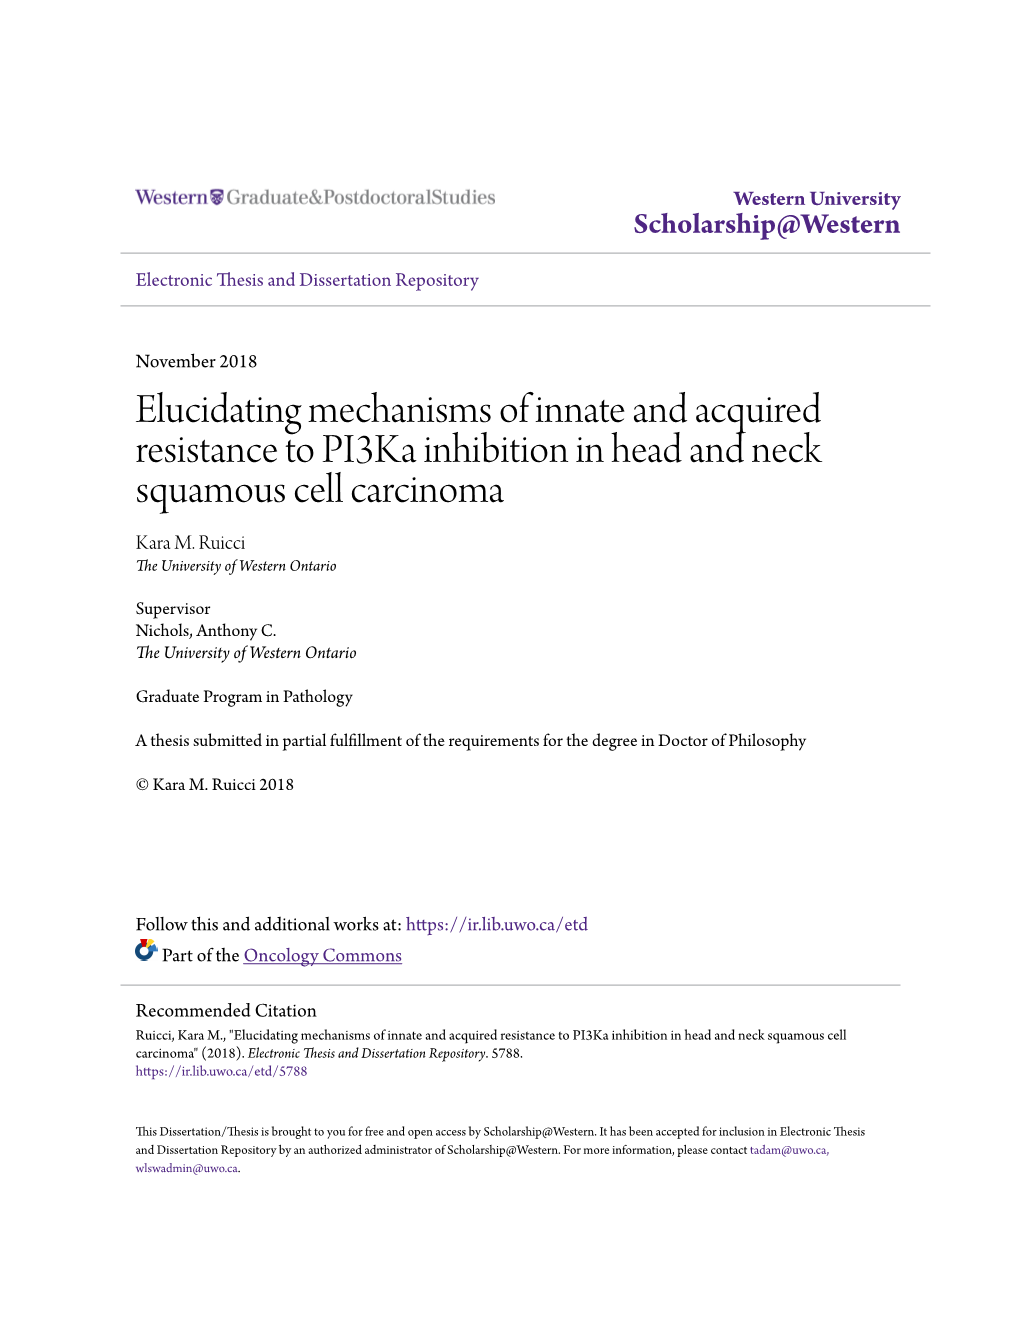 Elucidating Mechanisms of Innate and Acquired Resistance to Pi3ka Inhibition in Head and Neck Squamous Cell Carcinoma Kara M